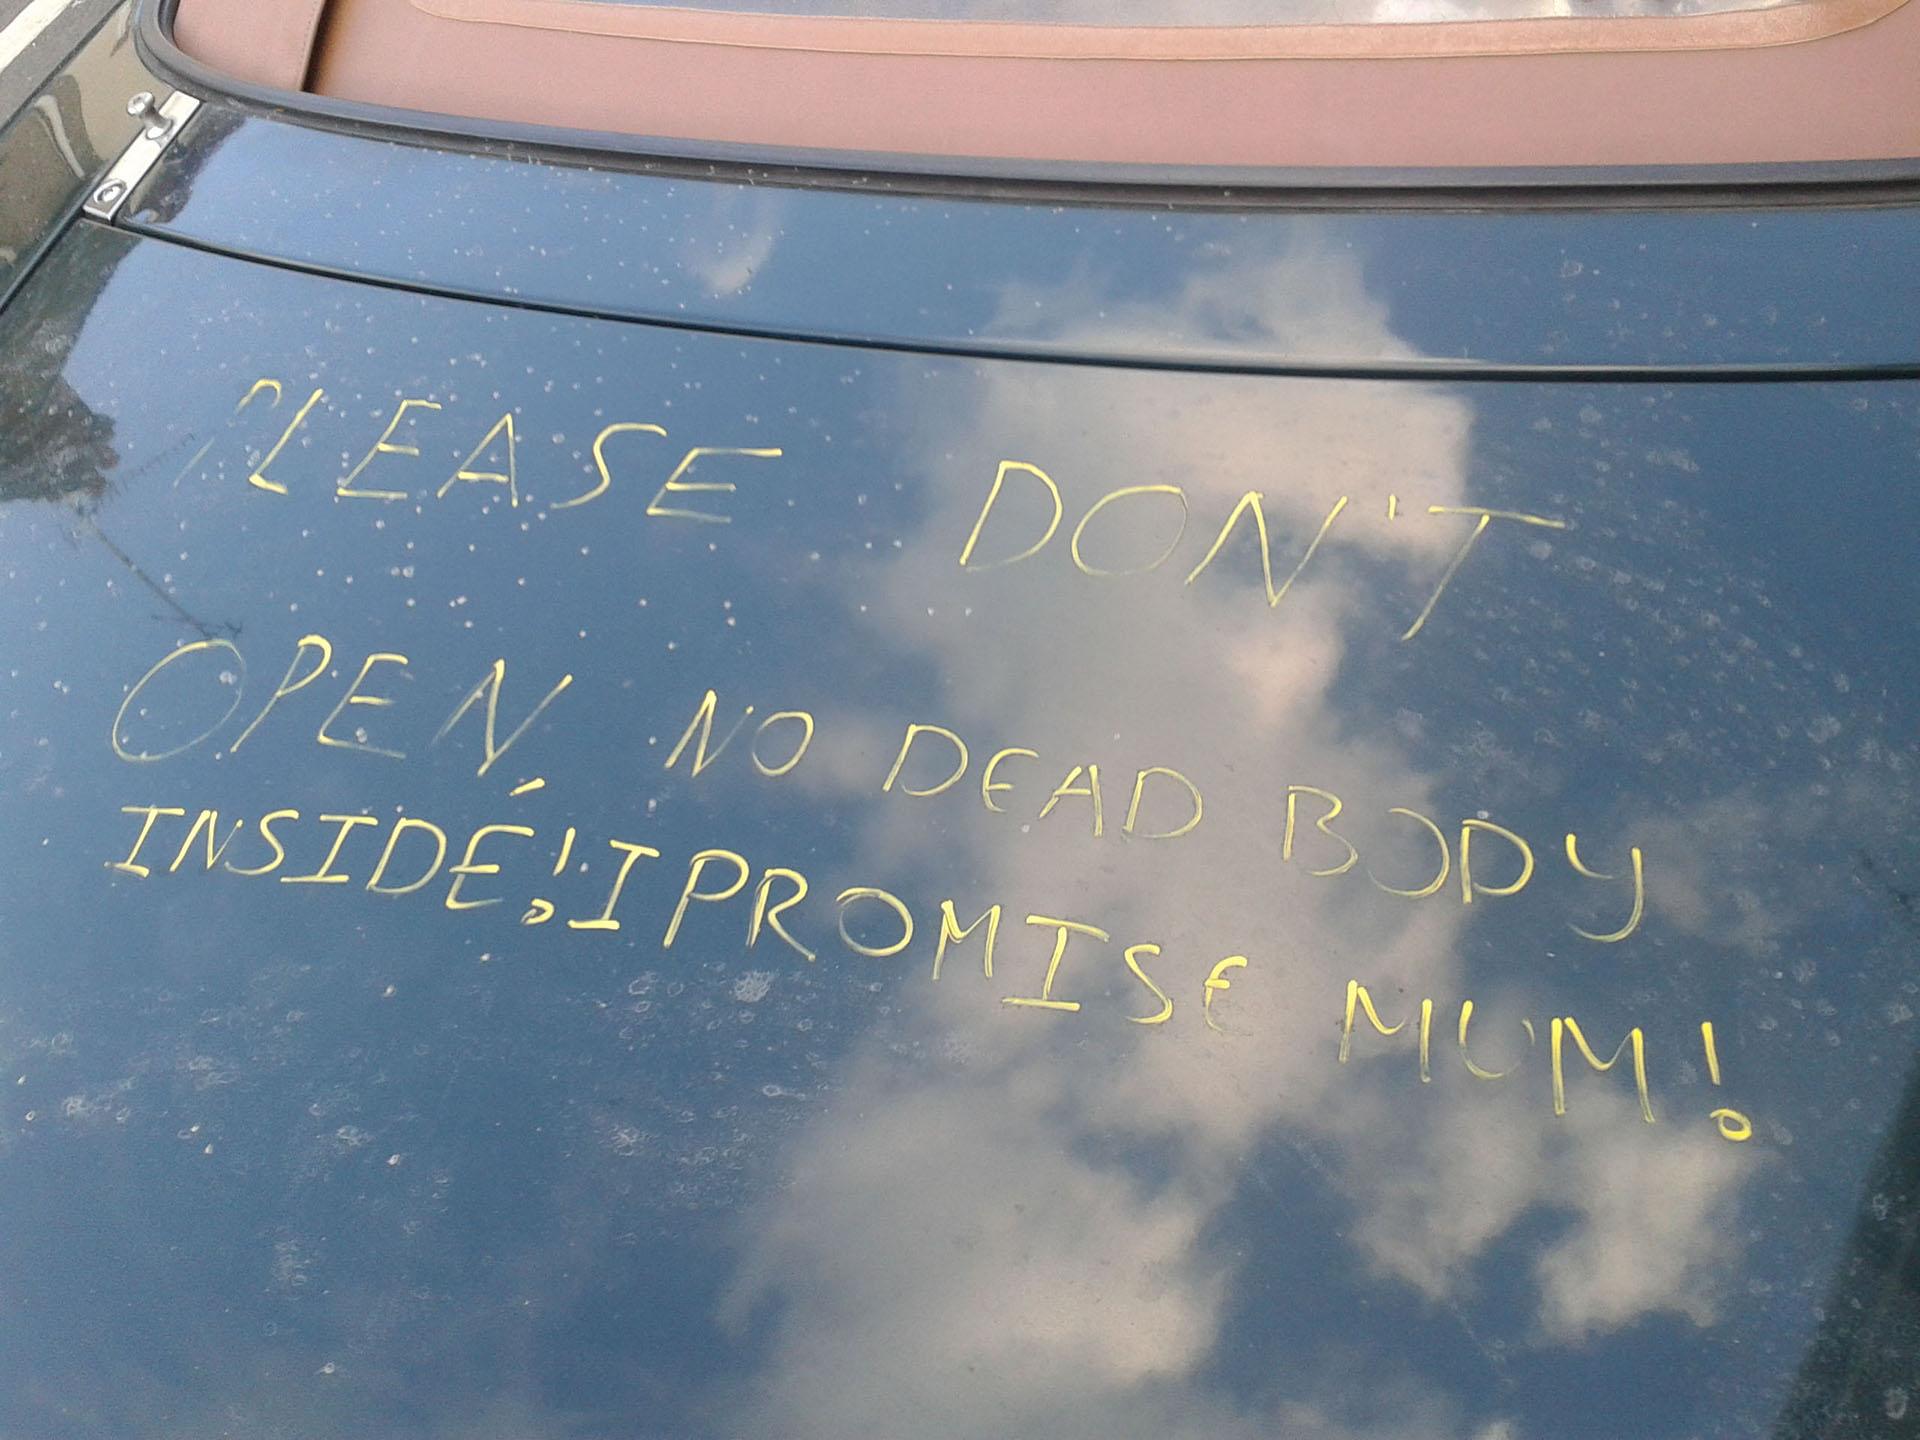 Serial Killer Car Message For His Mom!